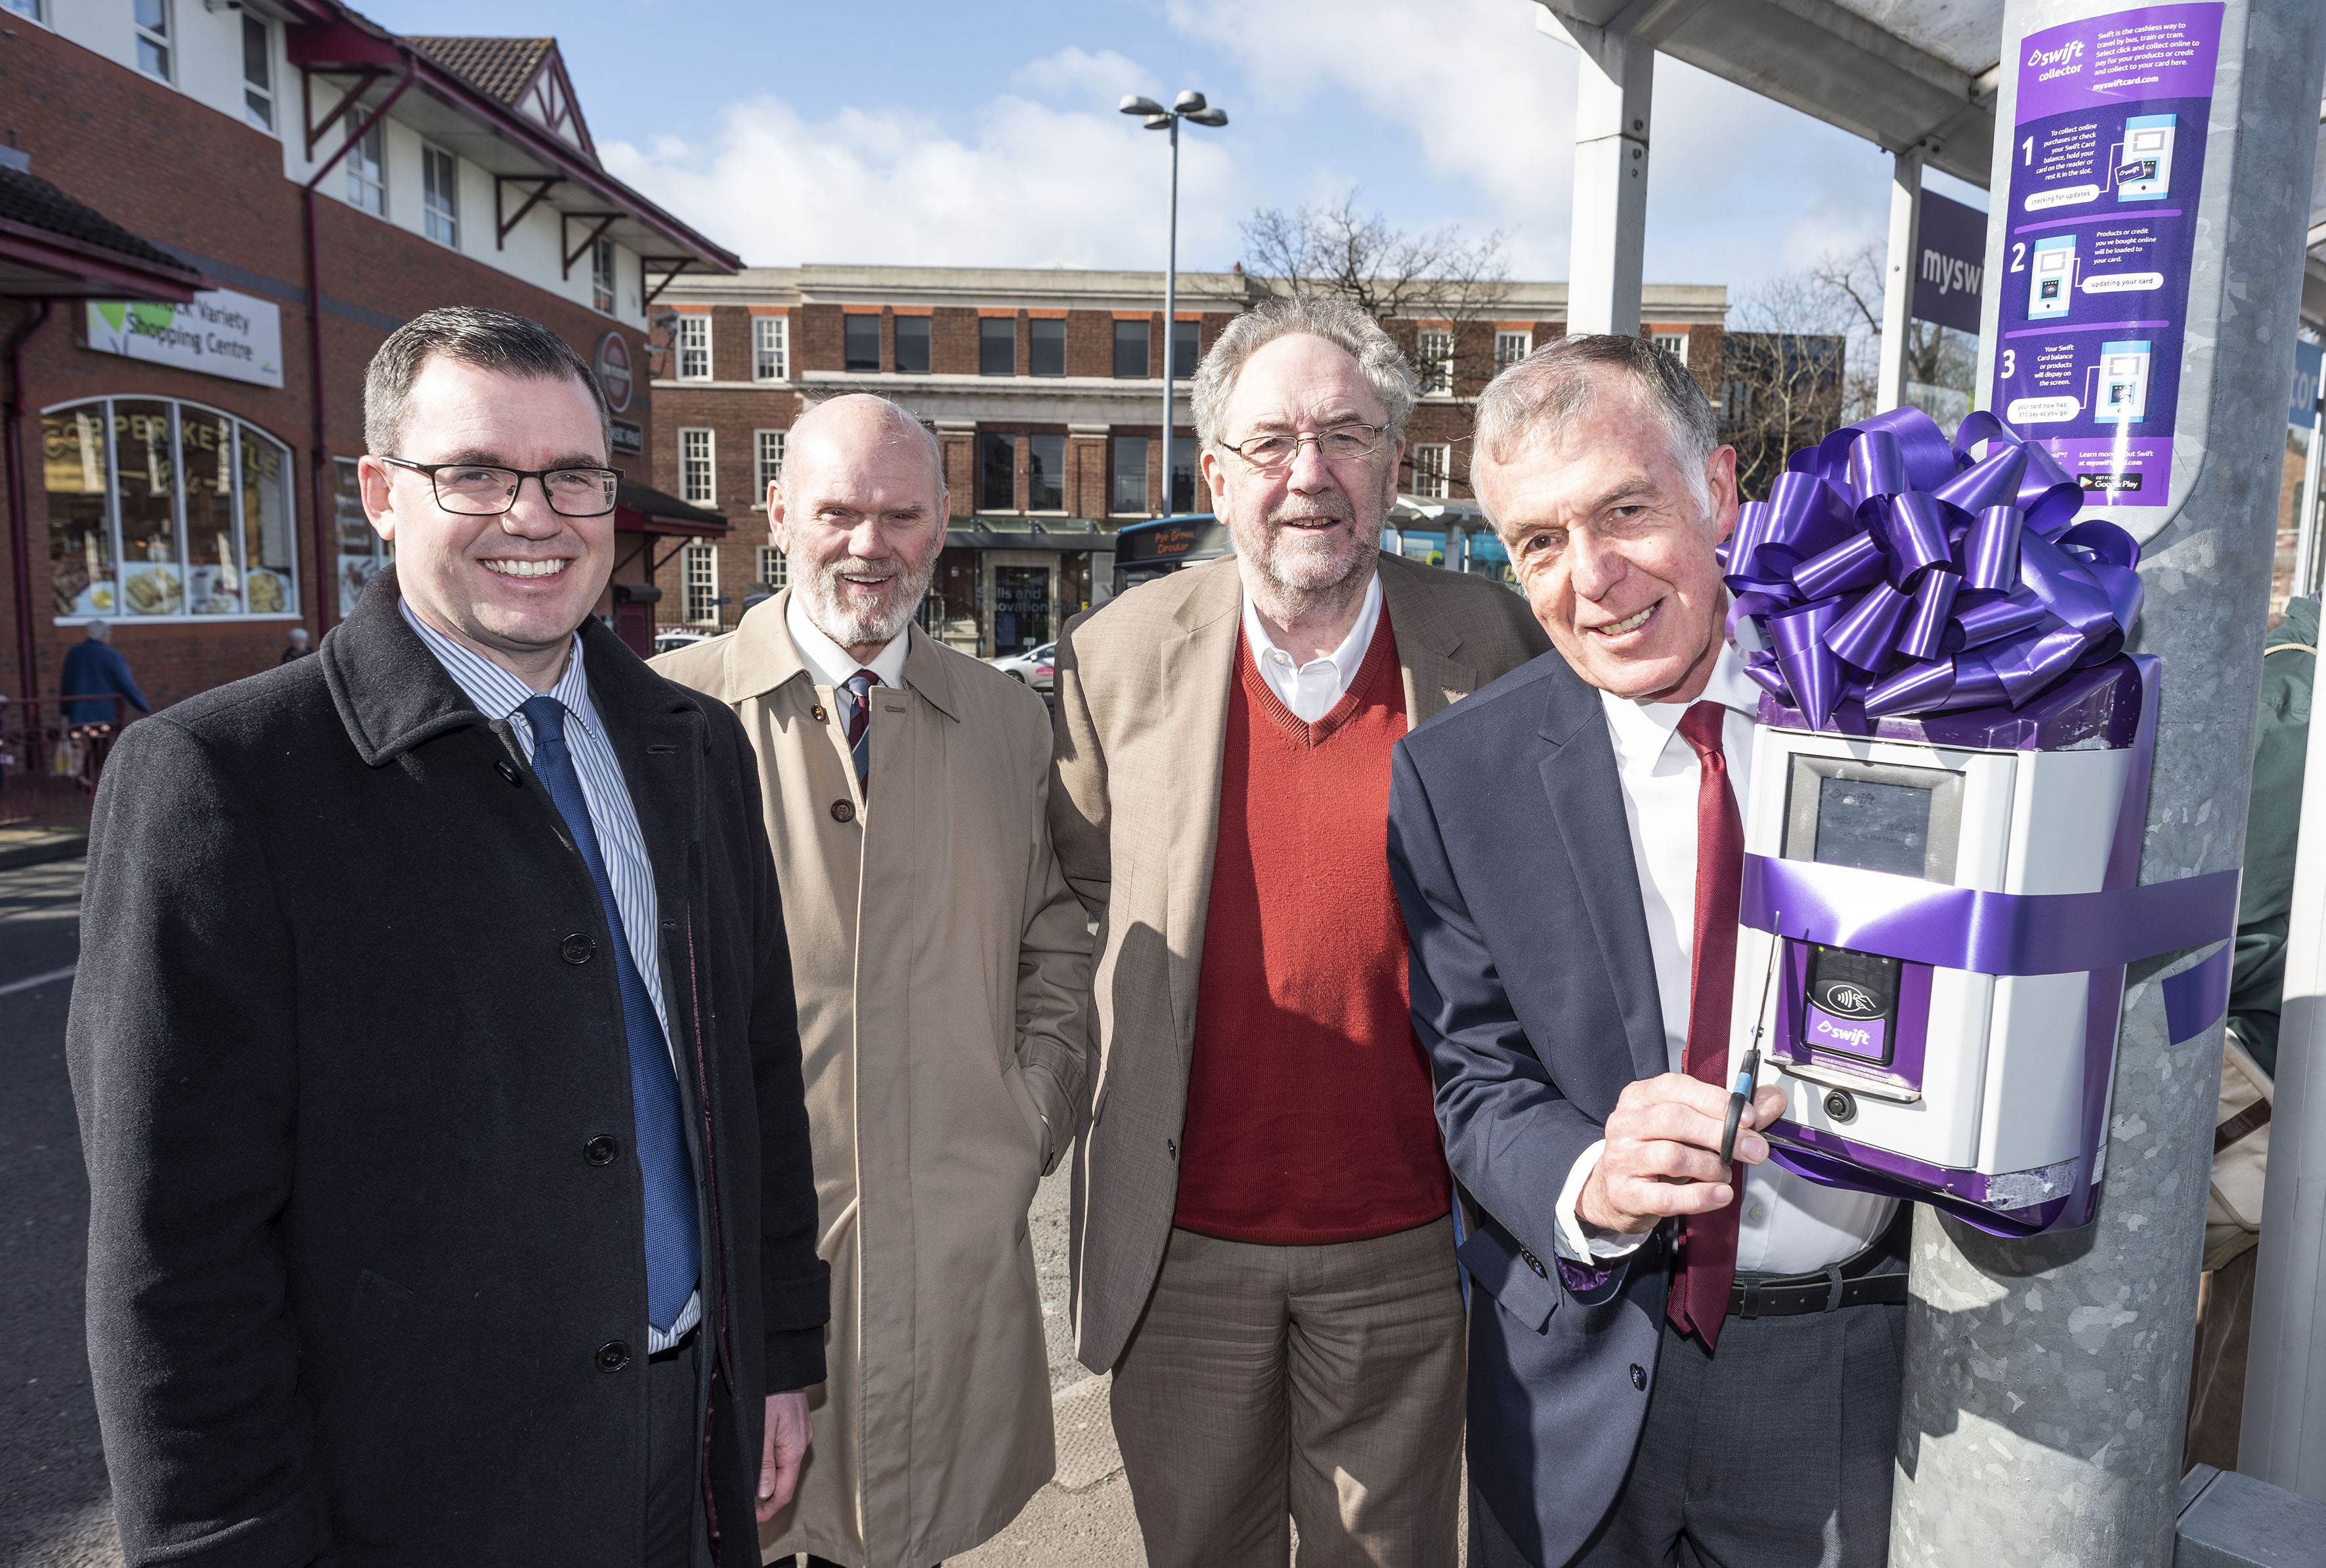 From left: Simon Mathieson, area managing director for Arriva Midlands North, Cllr Gordon Alcott, deputy leader of Cannock Chase Council, Cllr Roger Lawrence, lead member for transport for the WMCA and Cllr George Adamson, leader of Cannock Chase Council